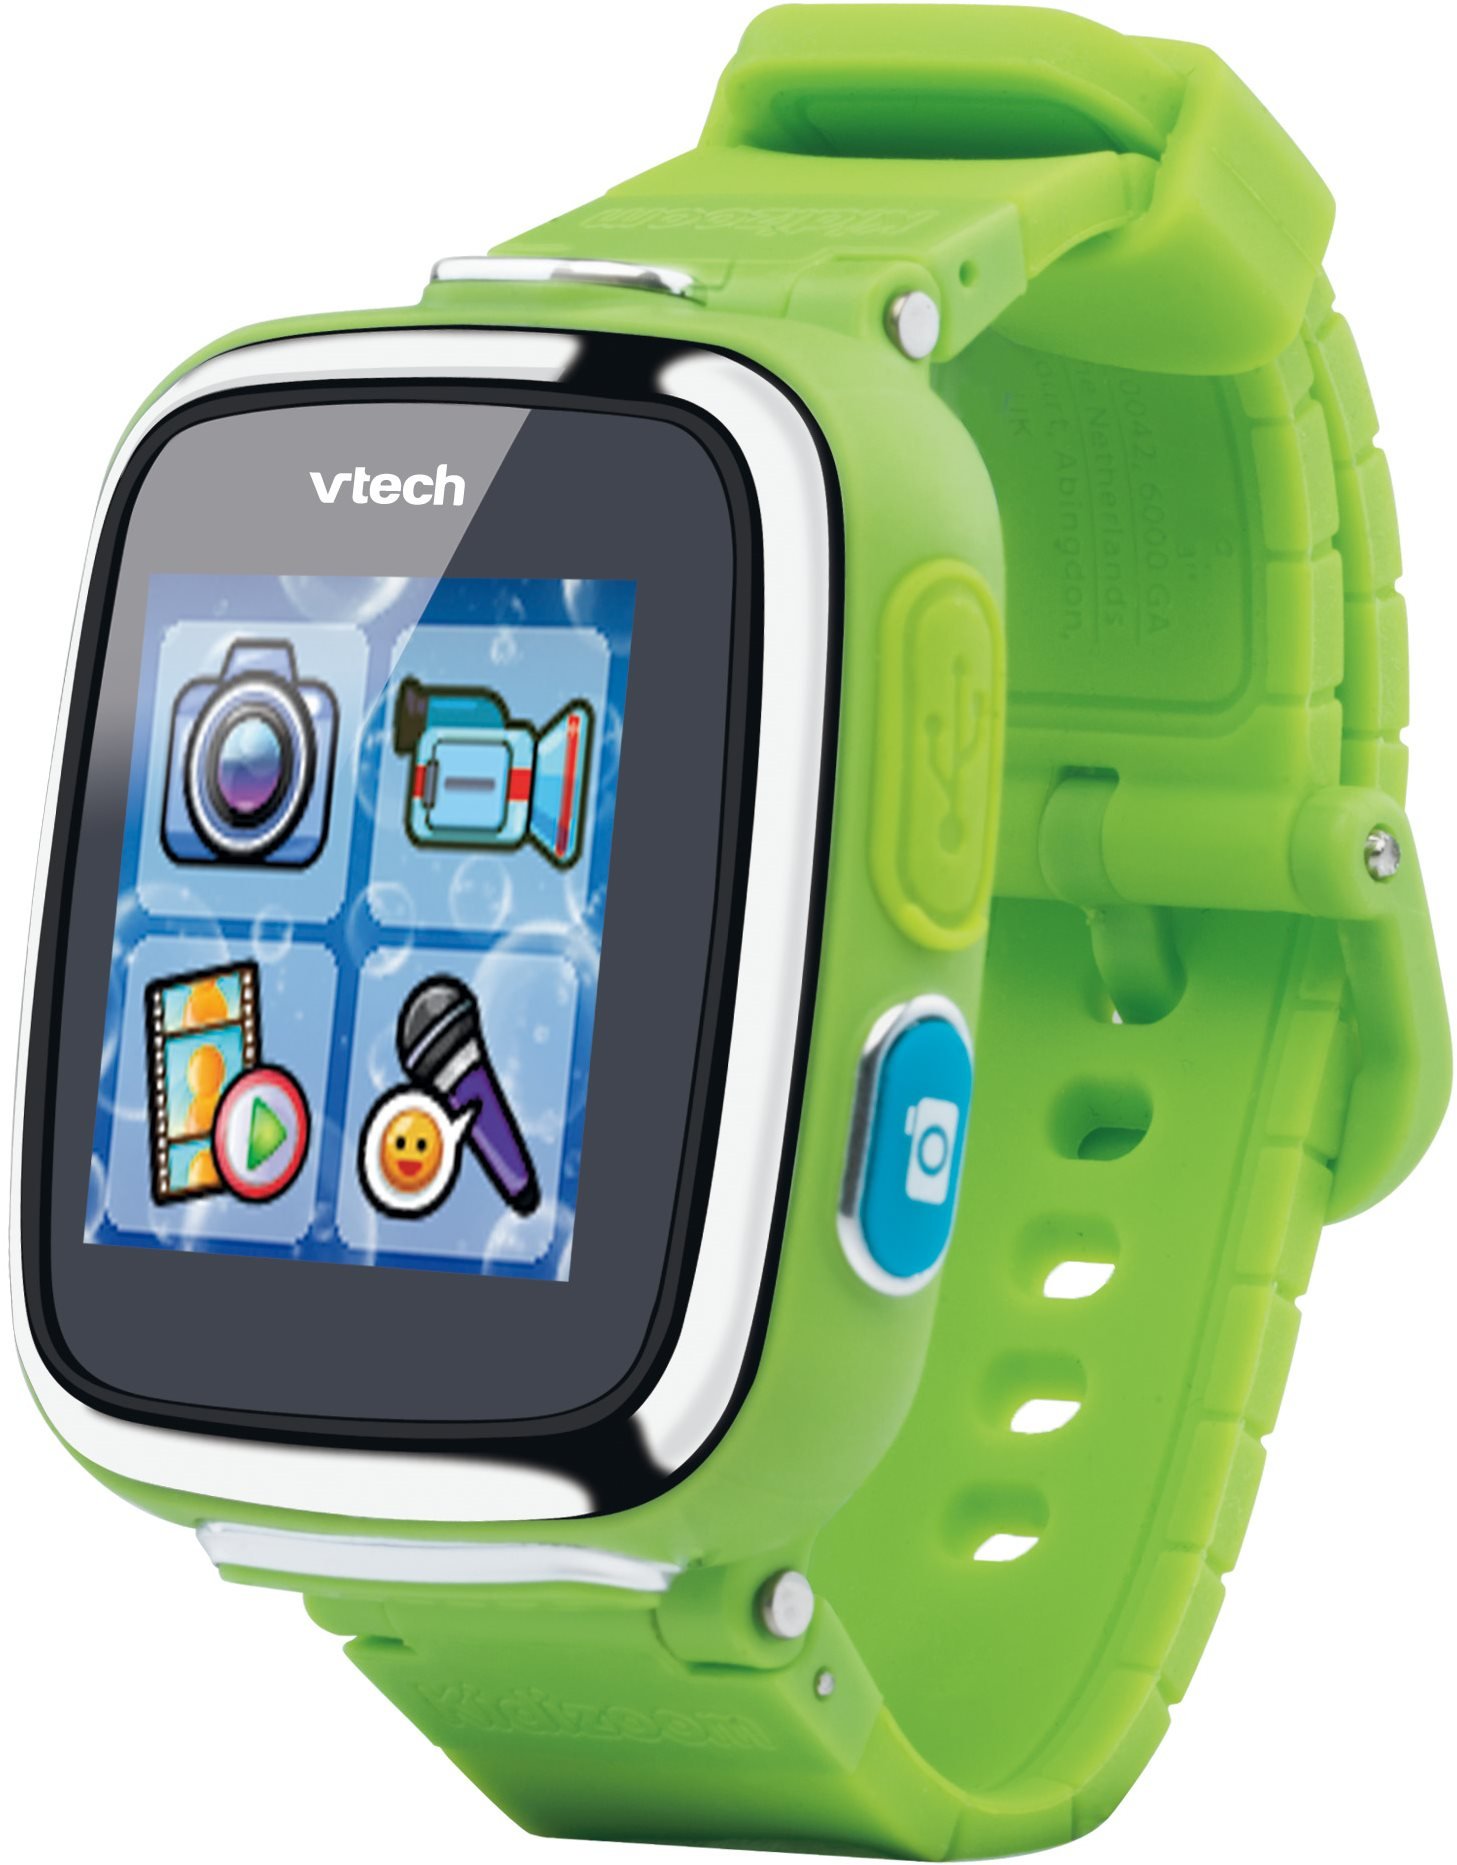 VTech Kidizoom Guide - Apps on Google Play